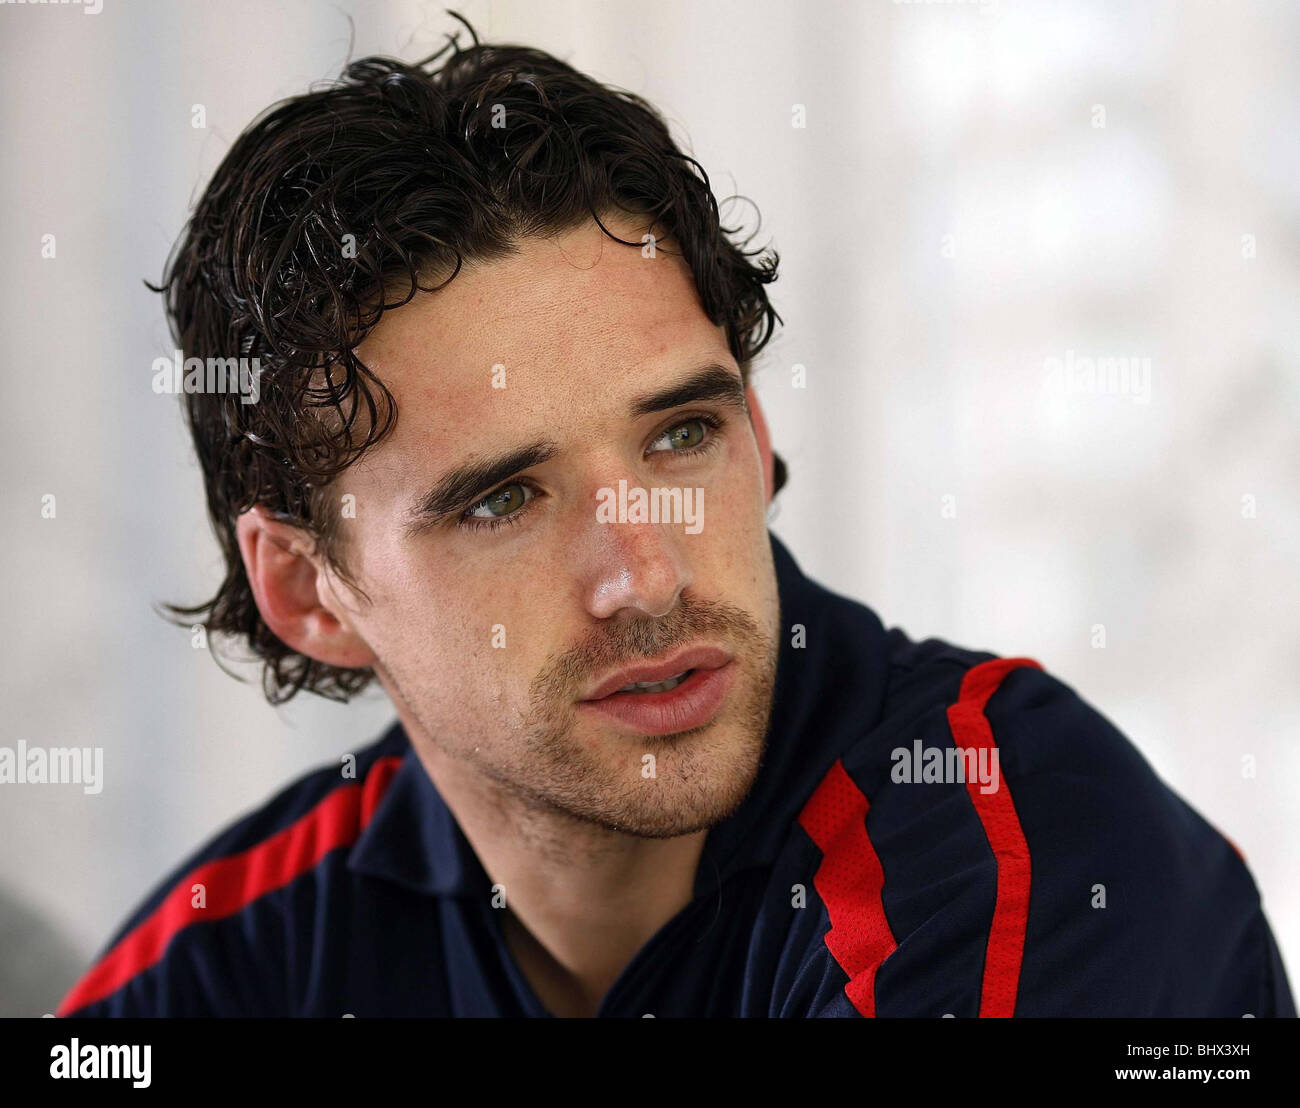 Owen Hargreaves seen here at a photo-shoot before joining the England team for the World Cup finals in Germany June 2006 Stock Photo